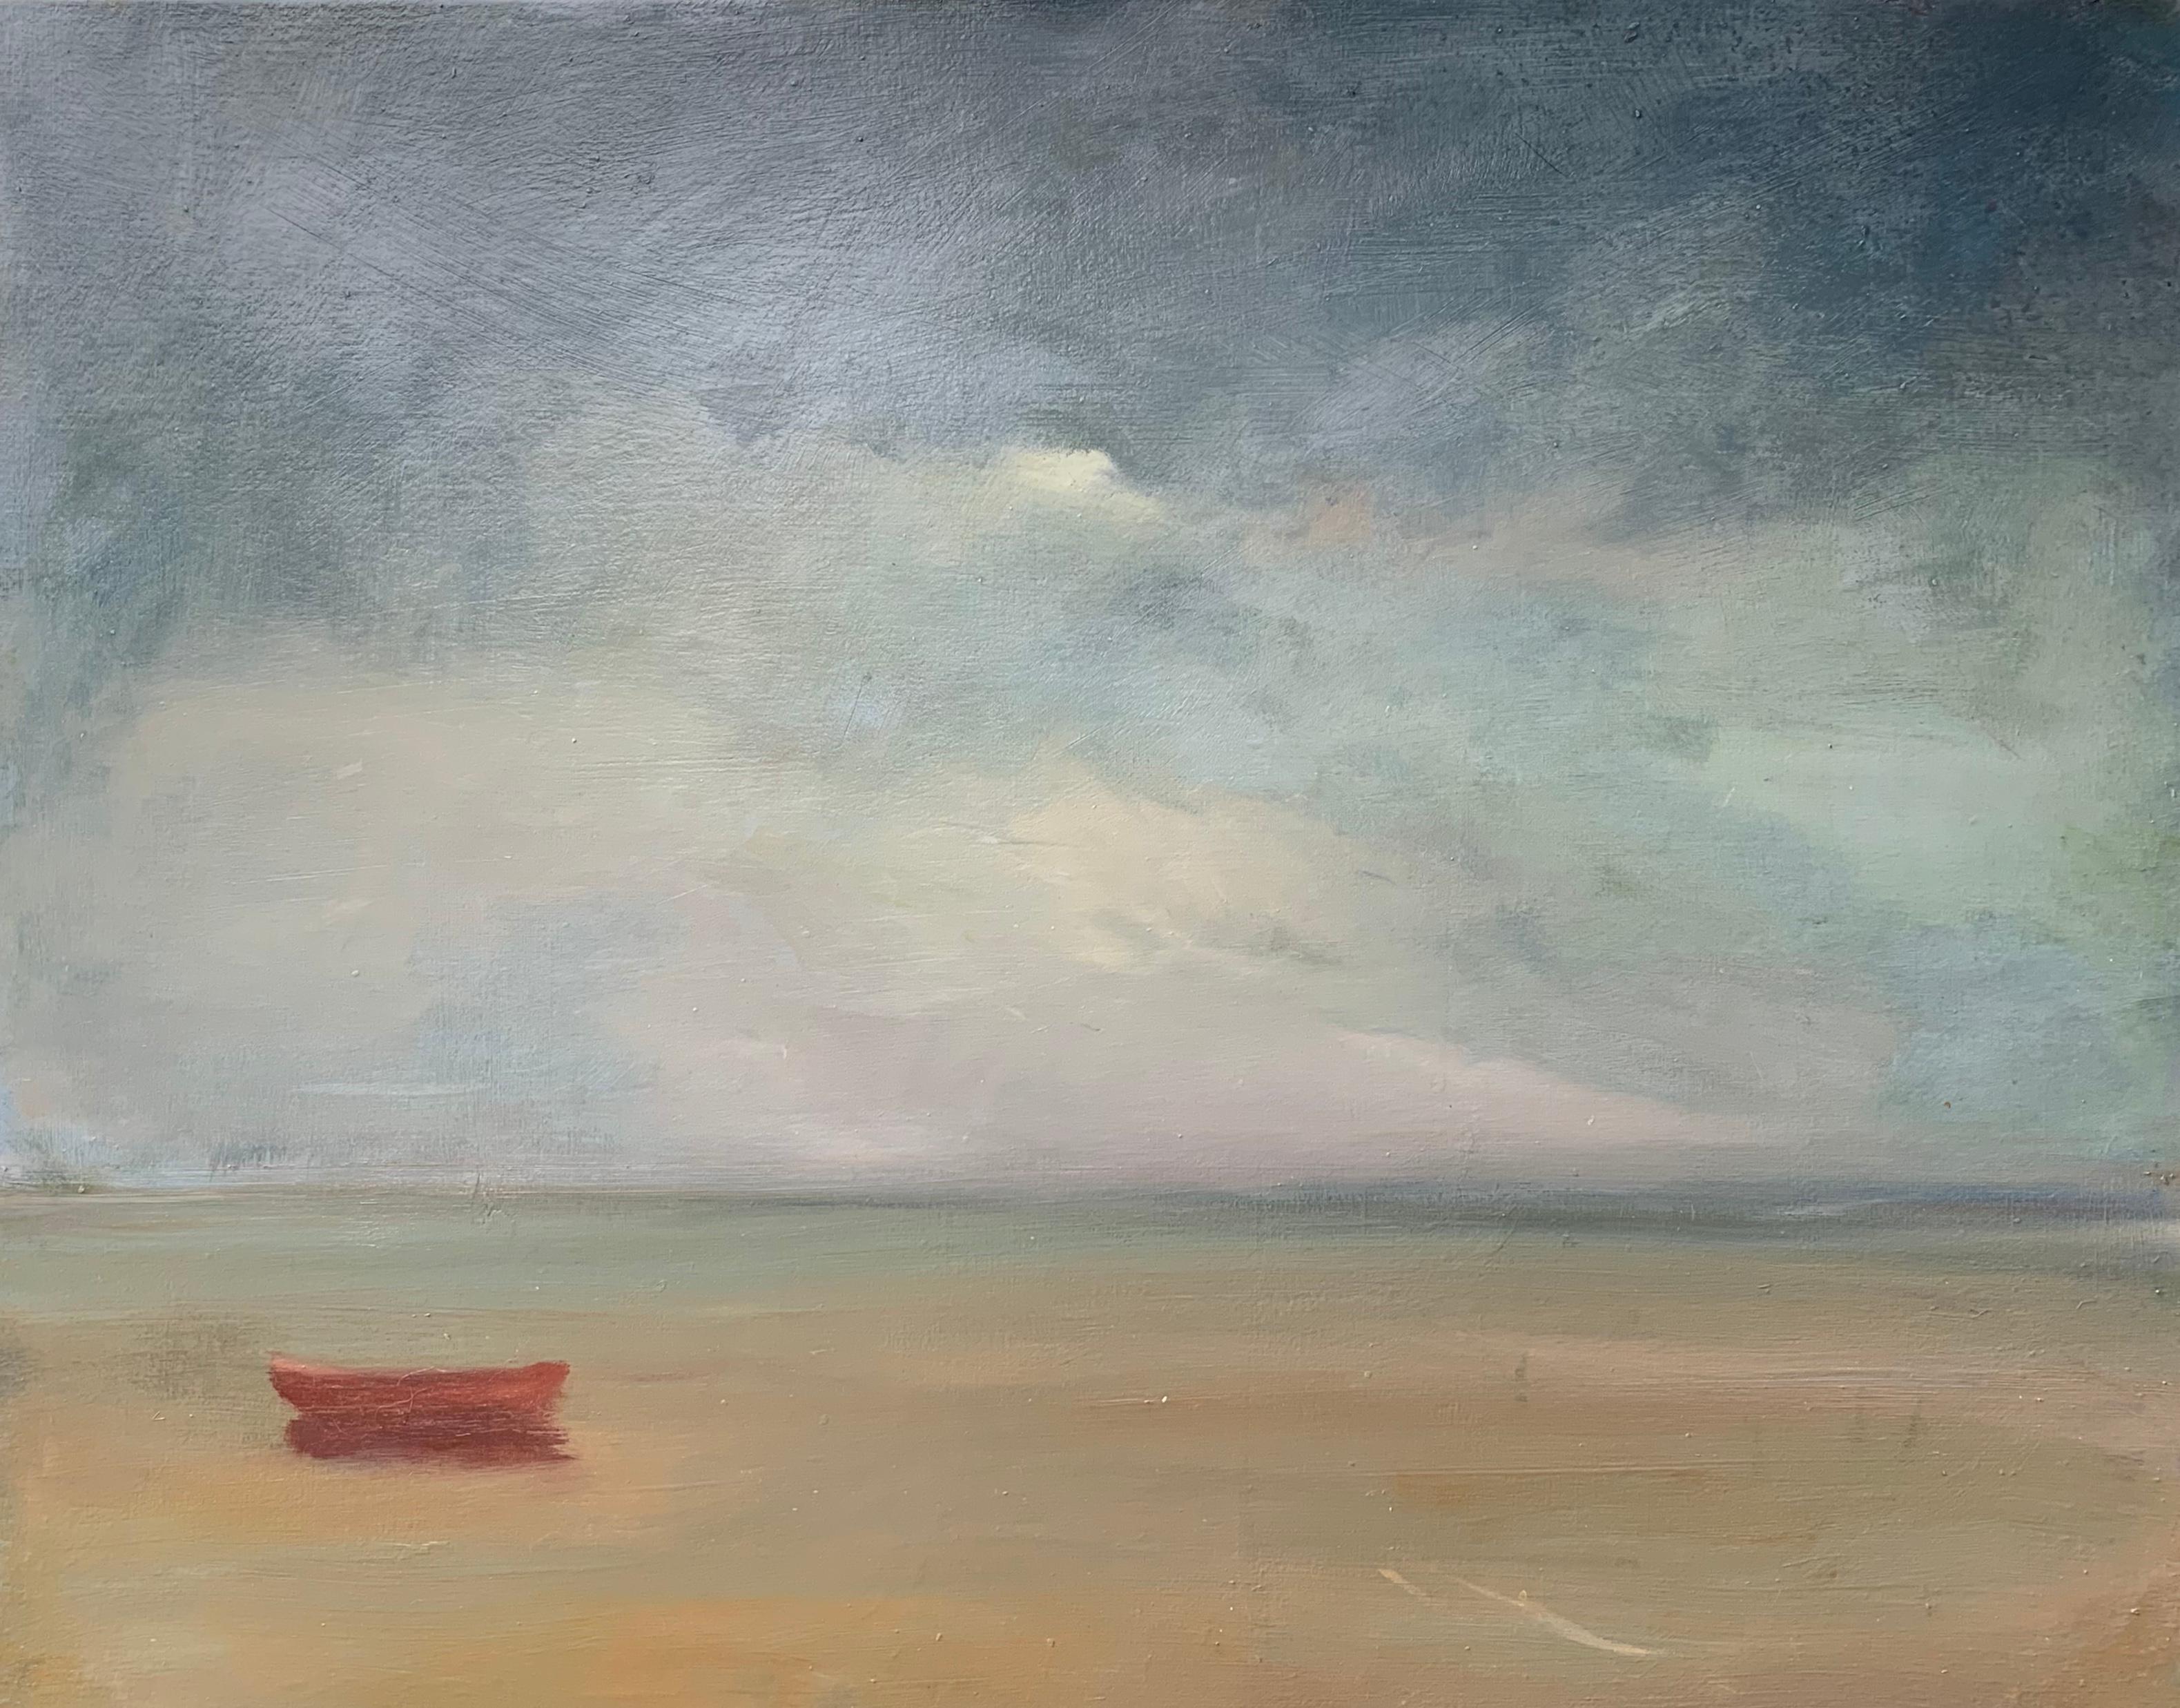 Ann Packard Figurative Painting - Lone Red Dory, Anne Packard 24x30" oil painting